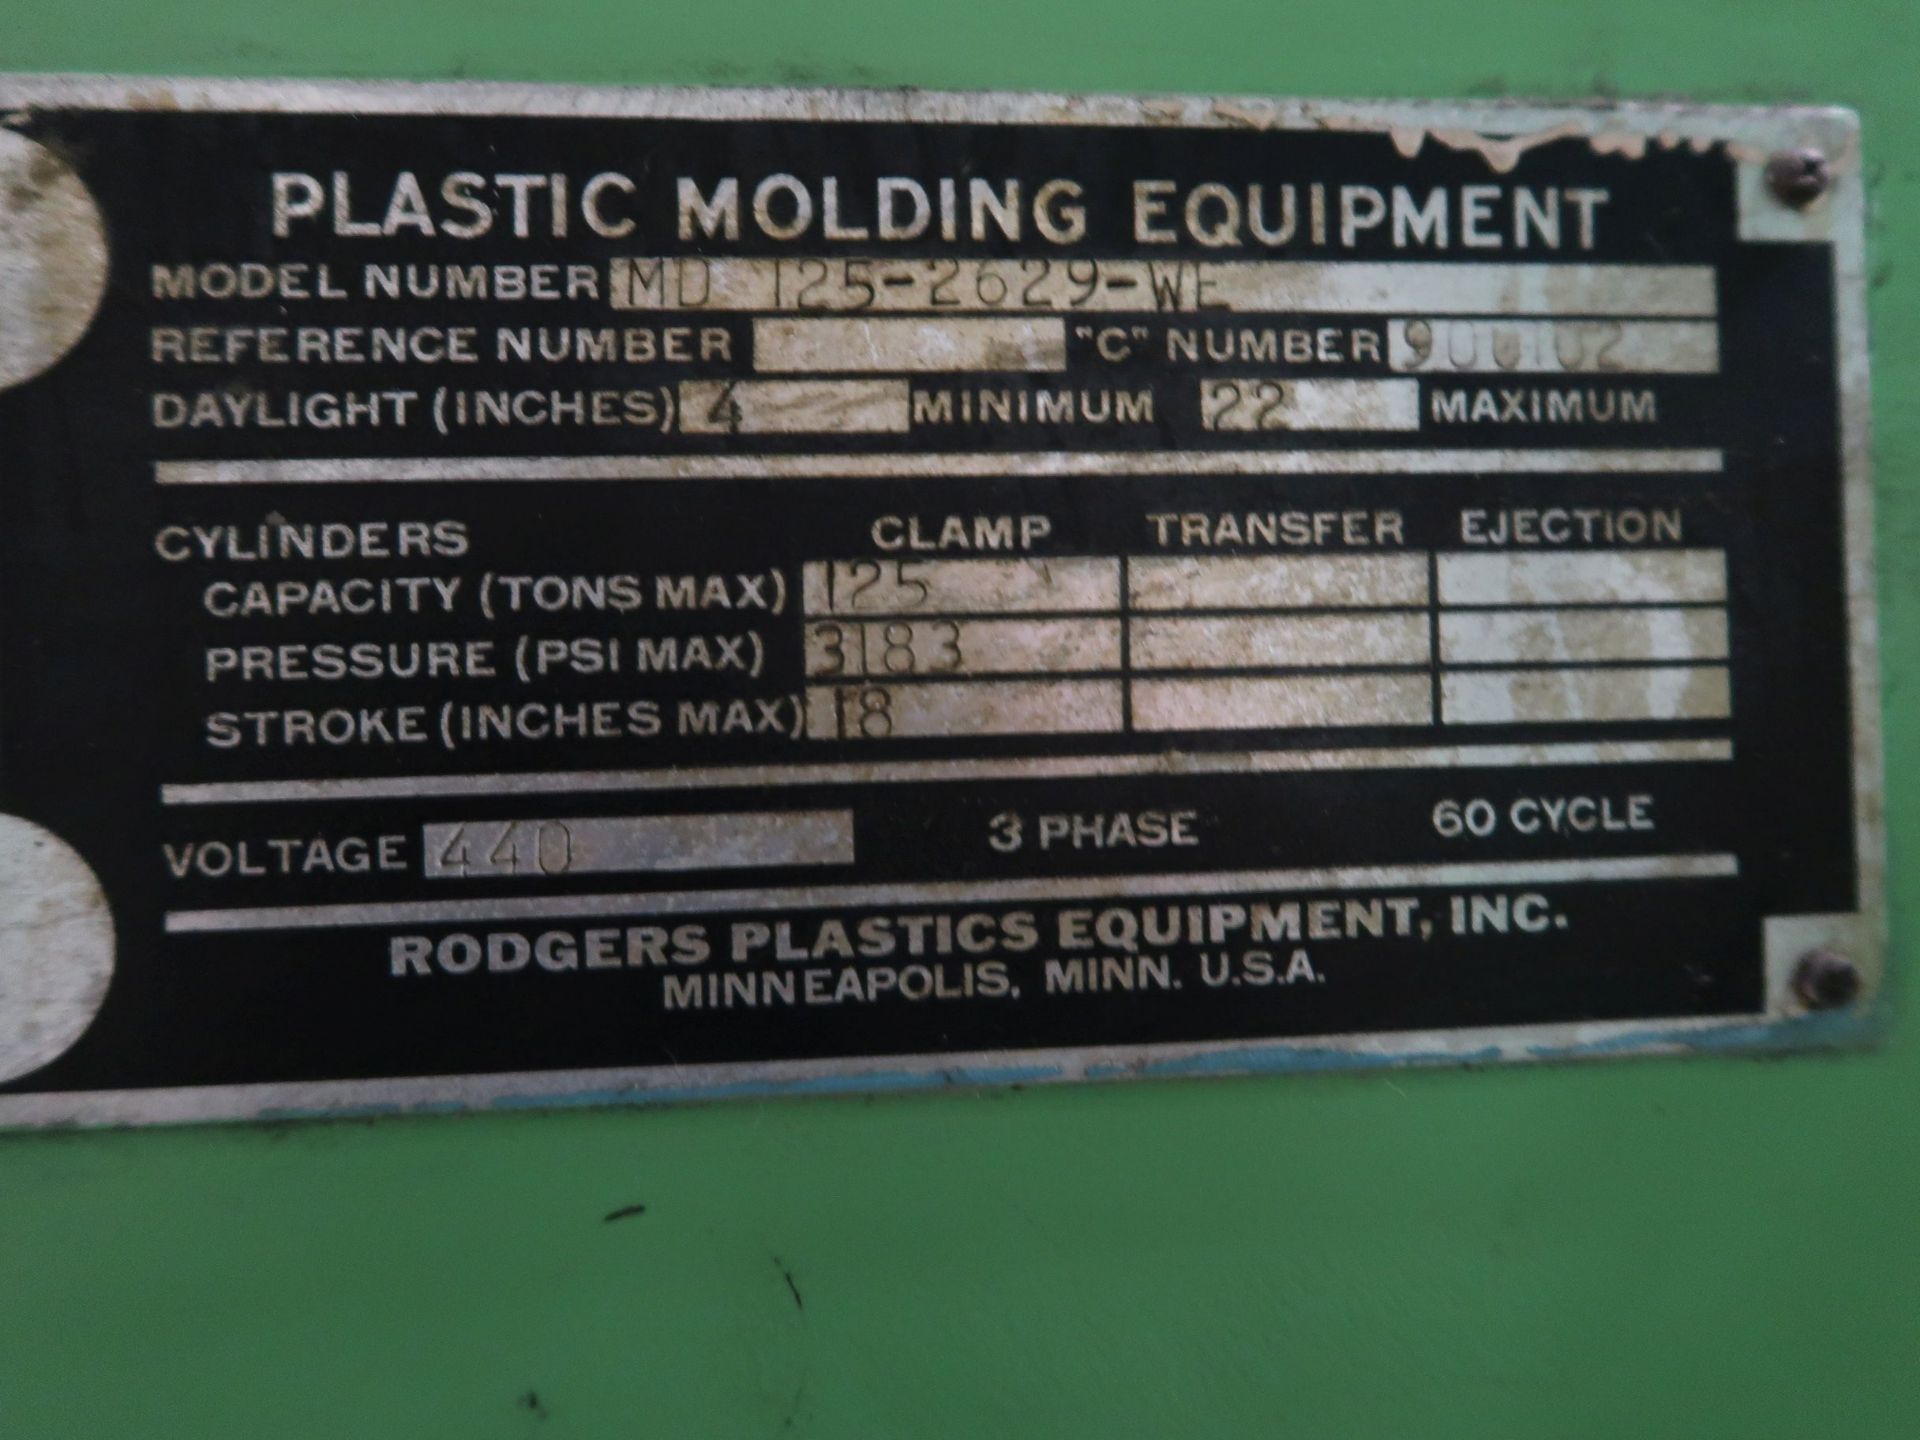 125 TON RODGERS PLASTIC EQUIPMENT MODEL MD125-2629A-WE FOUR-POST HYDRAULIC PRESS; S/N 900102, 4" MIN - Image 6 of 6